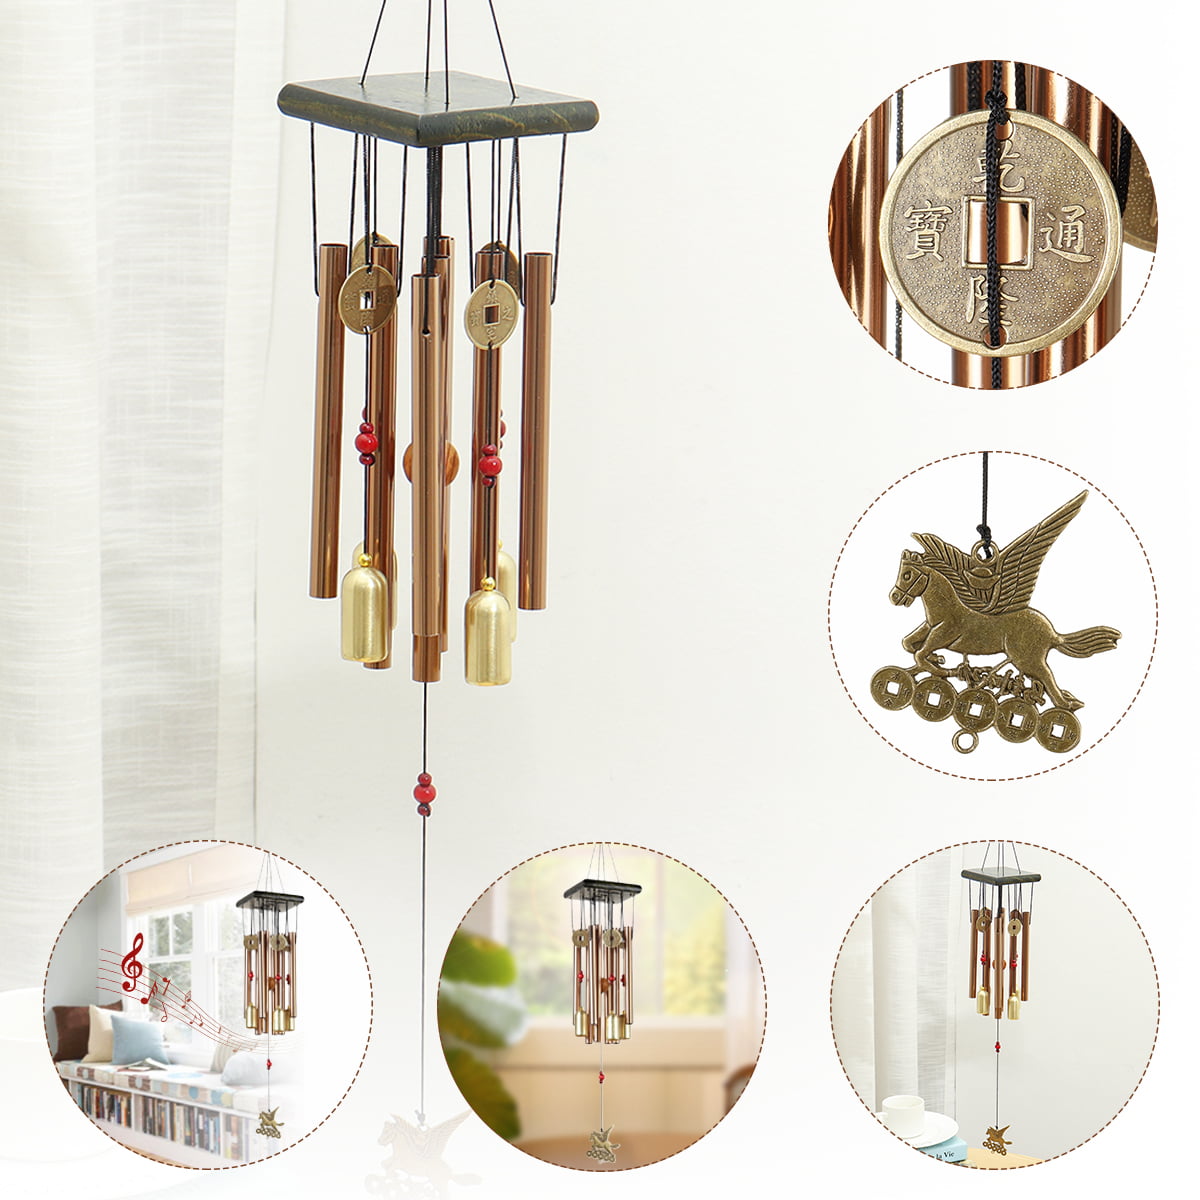 Details about   Large Wind Chimes 9 Tube Bells Metal Church Bell Heart Outdoor Garden Decor US 